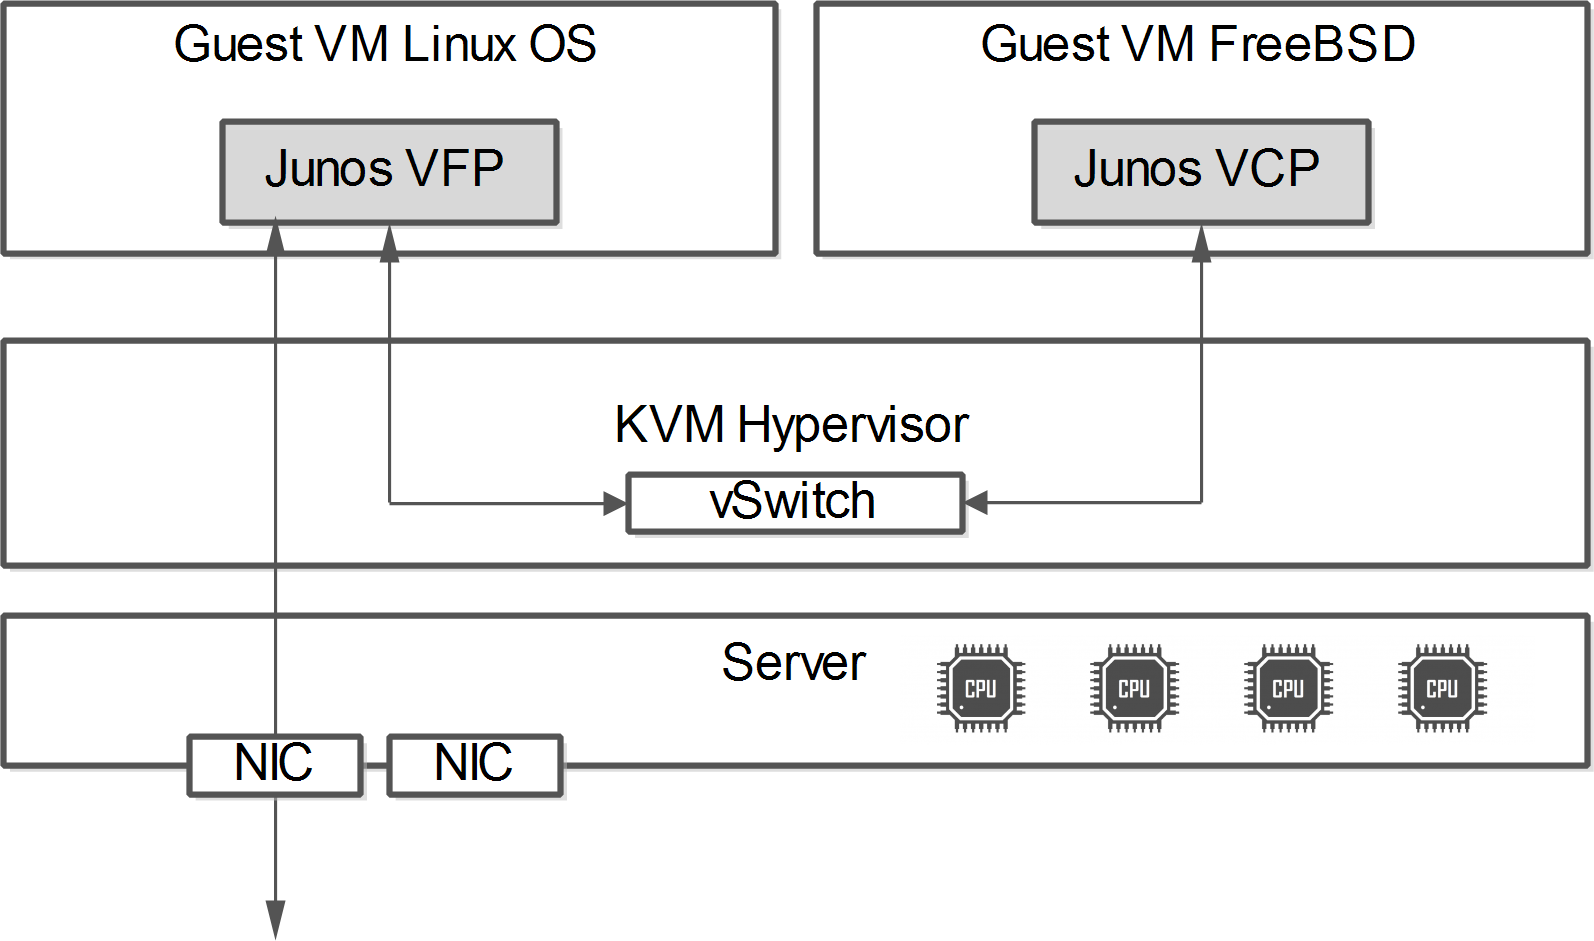 The vMX basic system architecture